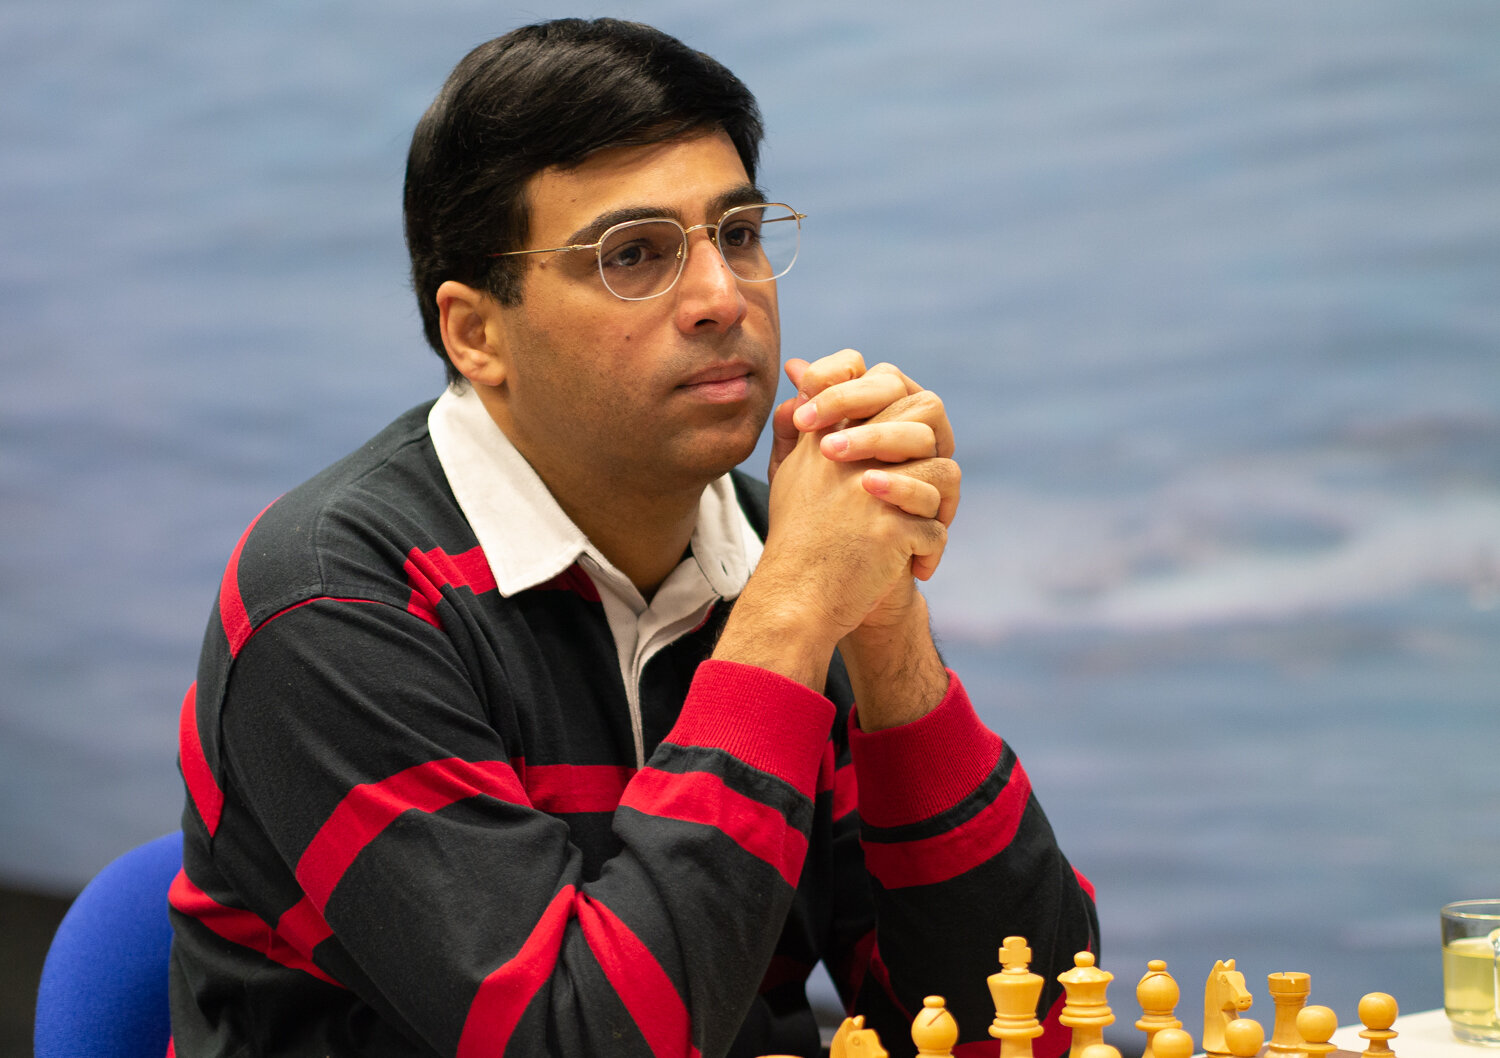 The chess games of Viswanathan Anand